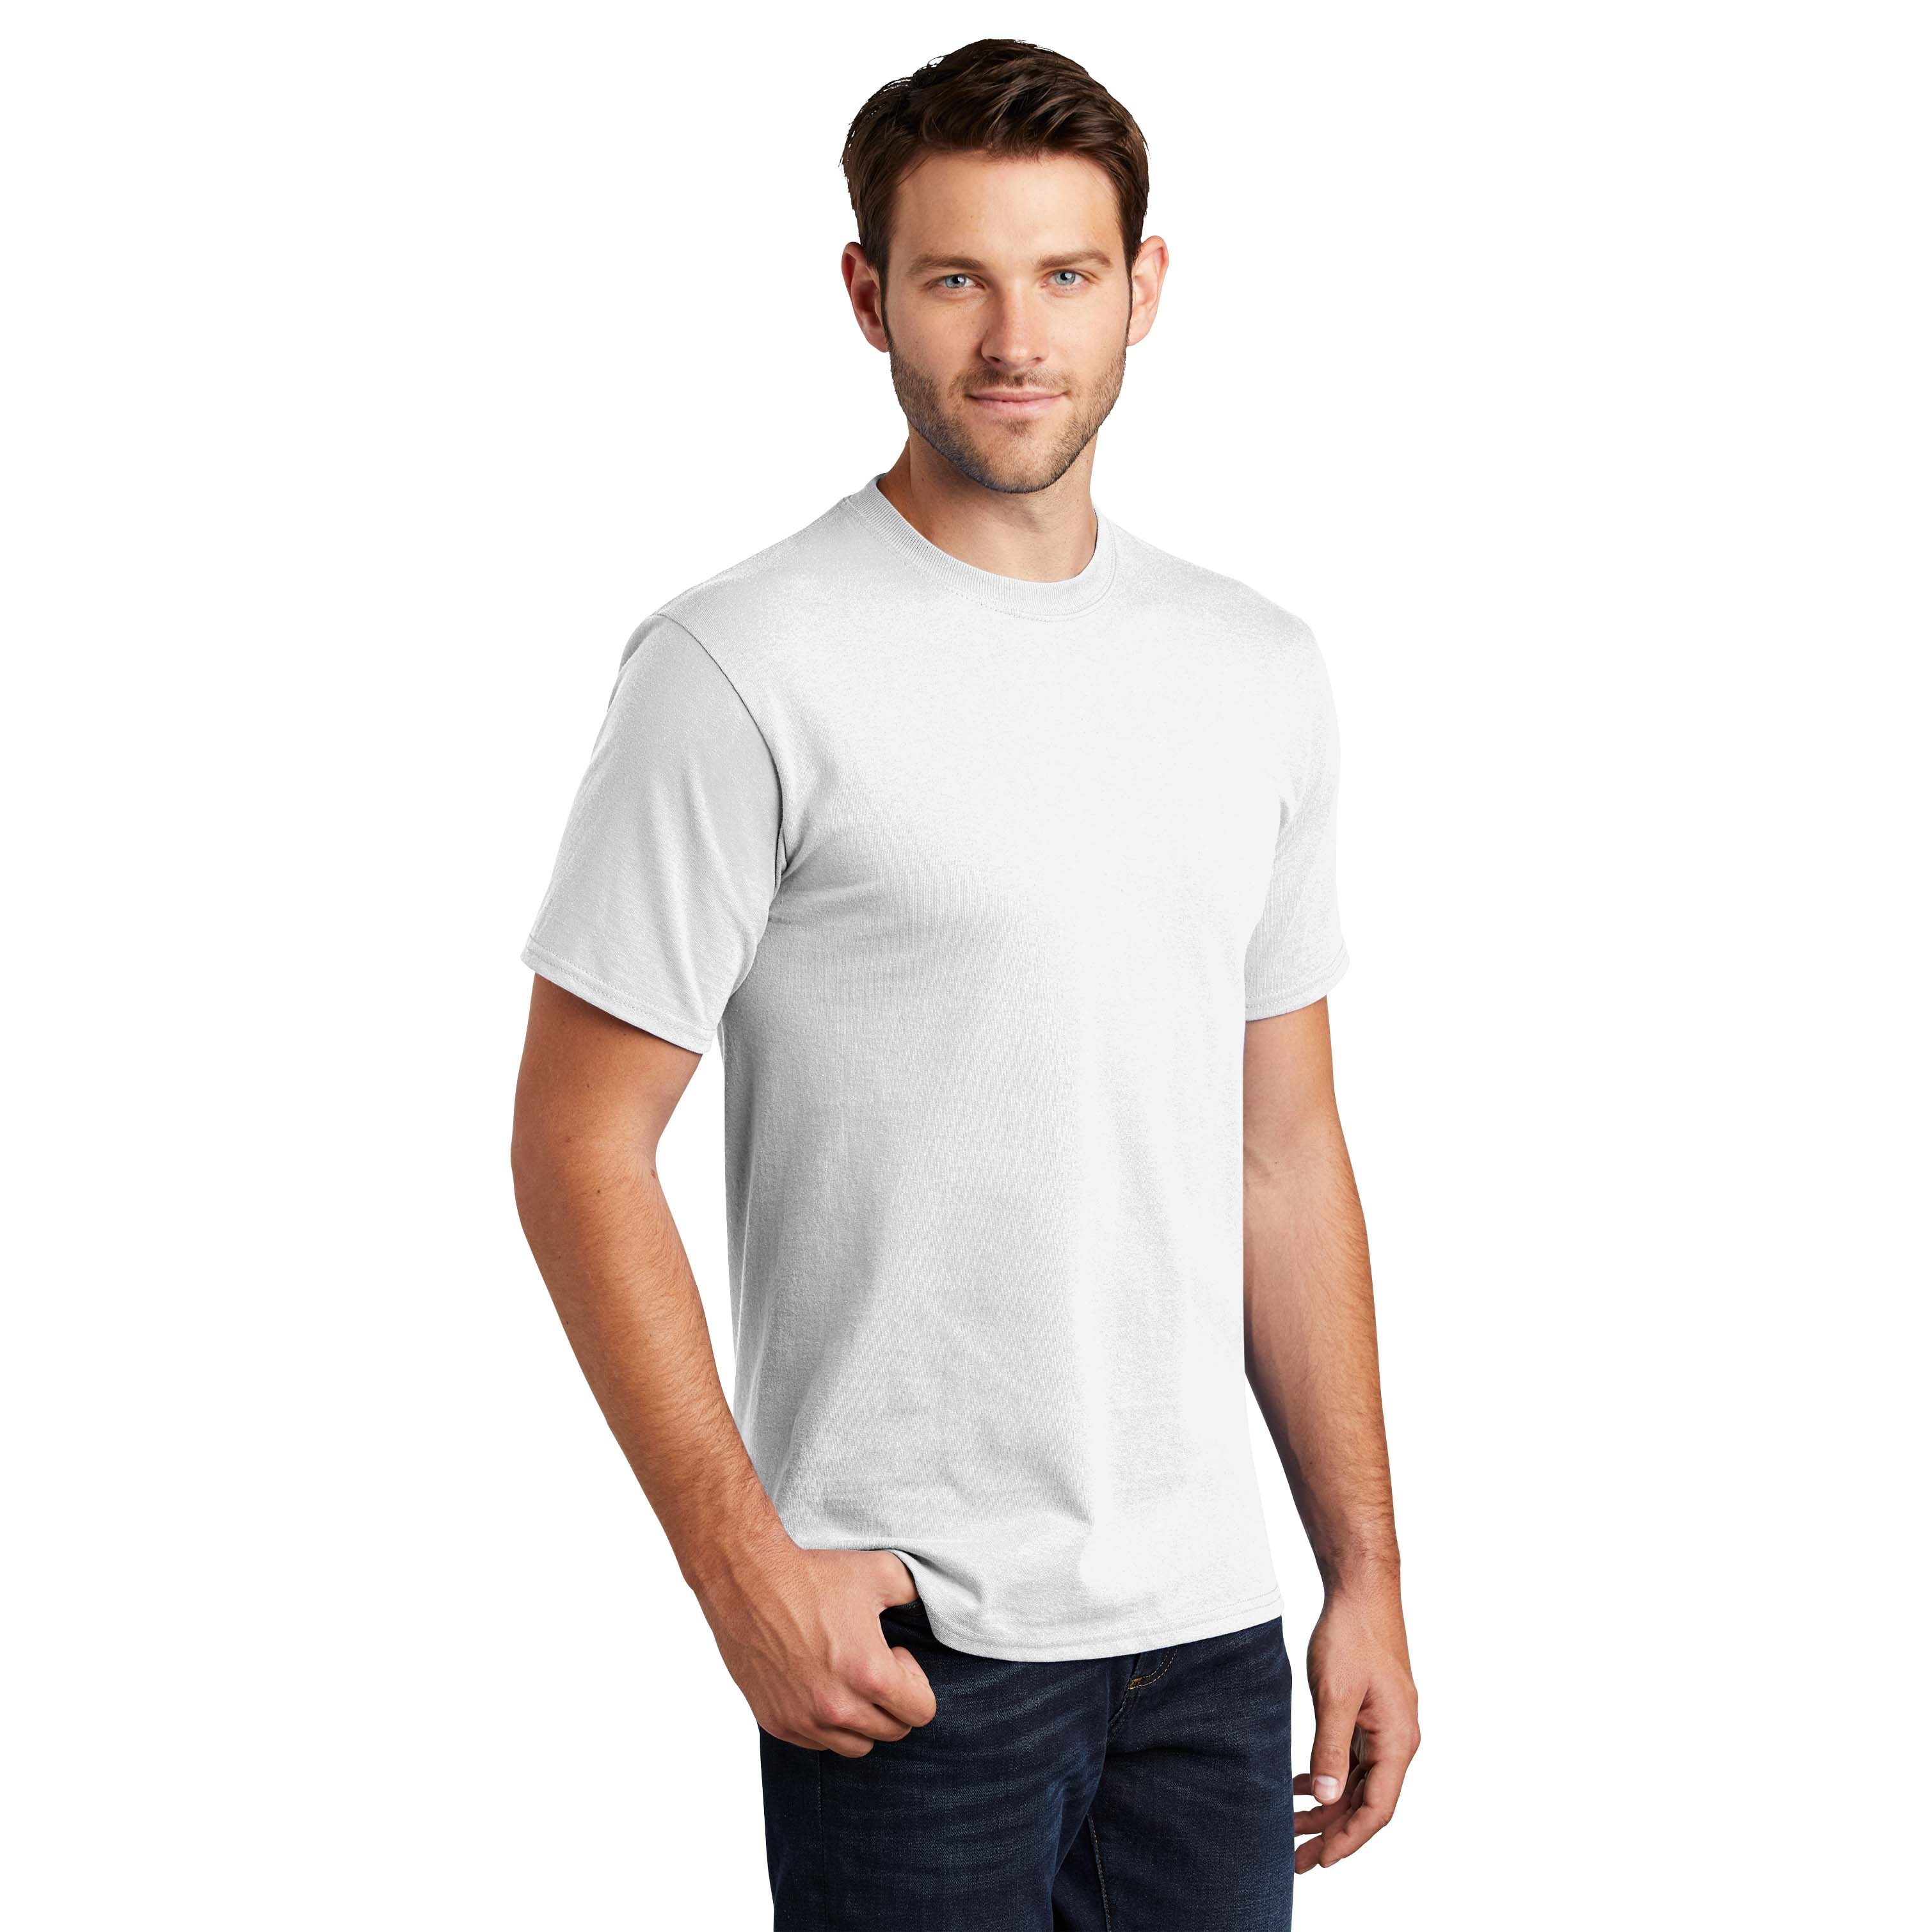 Men's Carefree Non-shrink Tee with Pocket, Traditional Fit Delta Blue Extra Large, Cotton | L.L.Bean